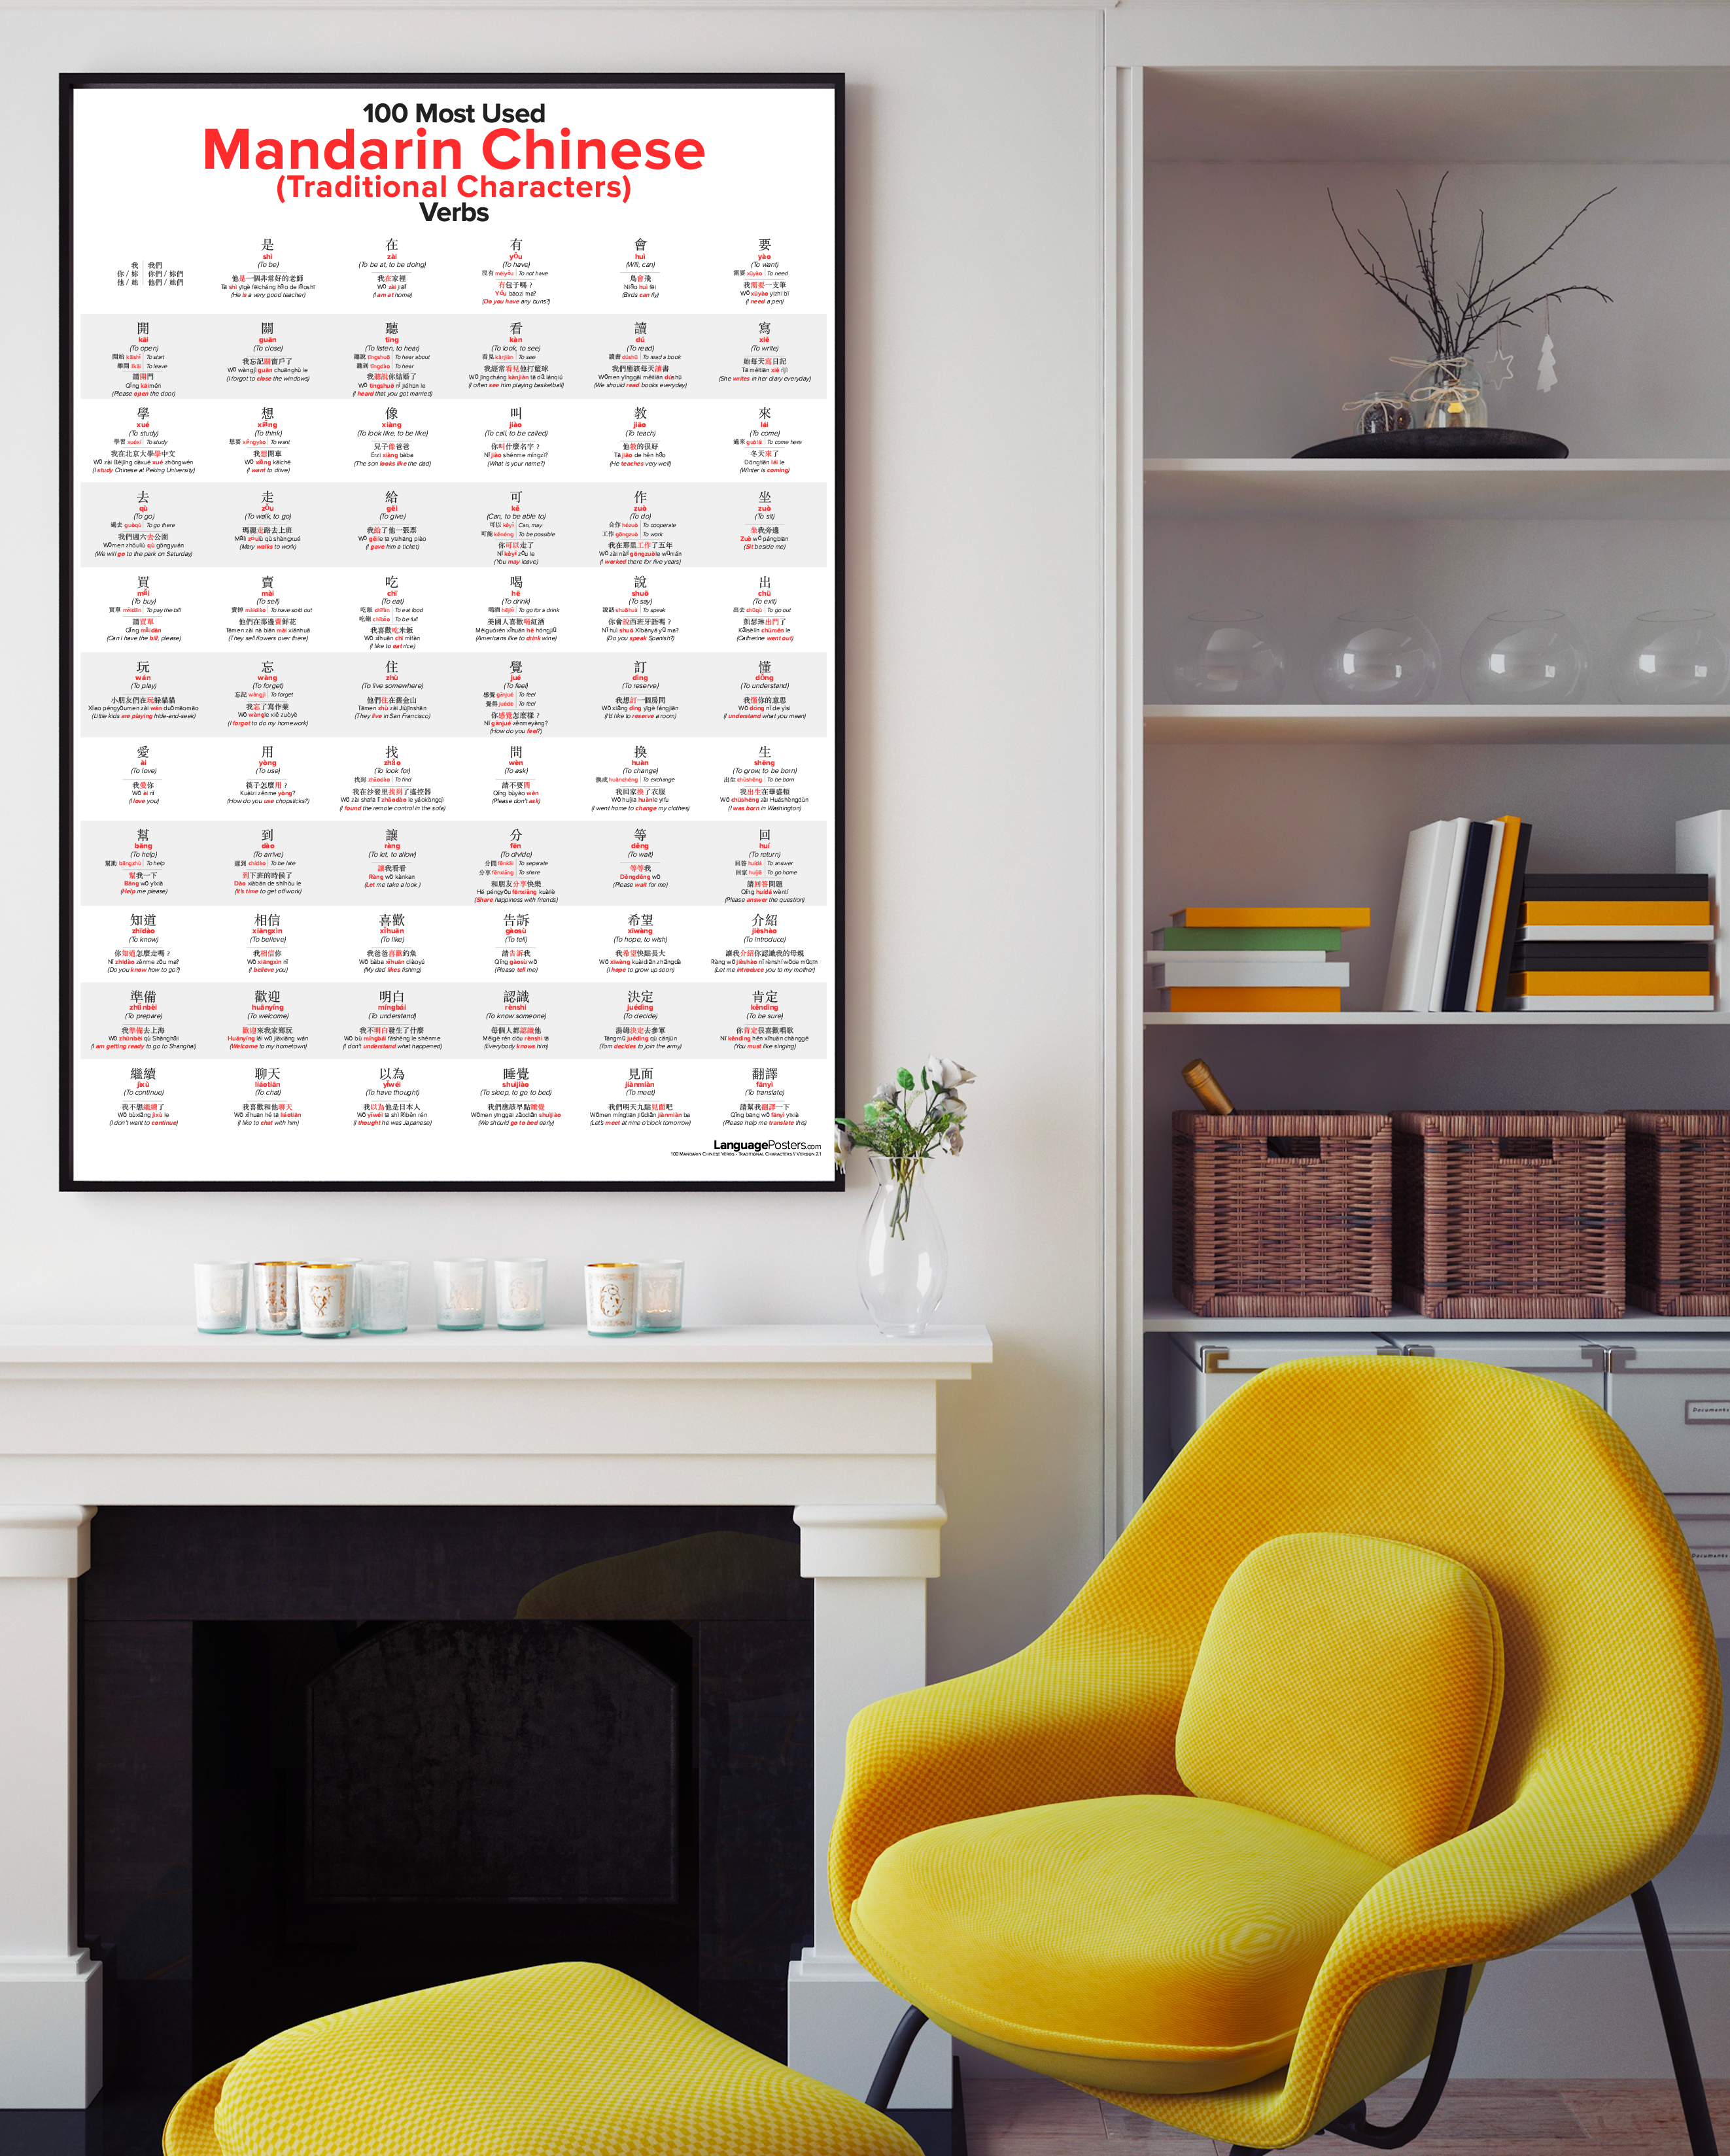 100 Most Used Mandarin Chinese Verbs Poster in frame, Traditional Characters - LanguagePosters.com